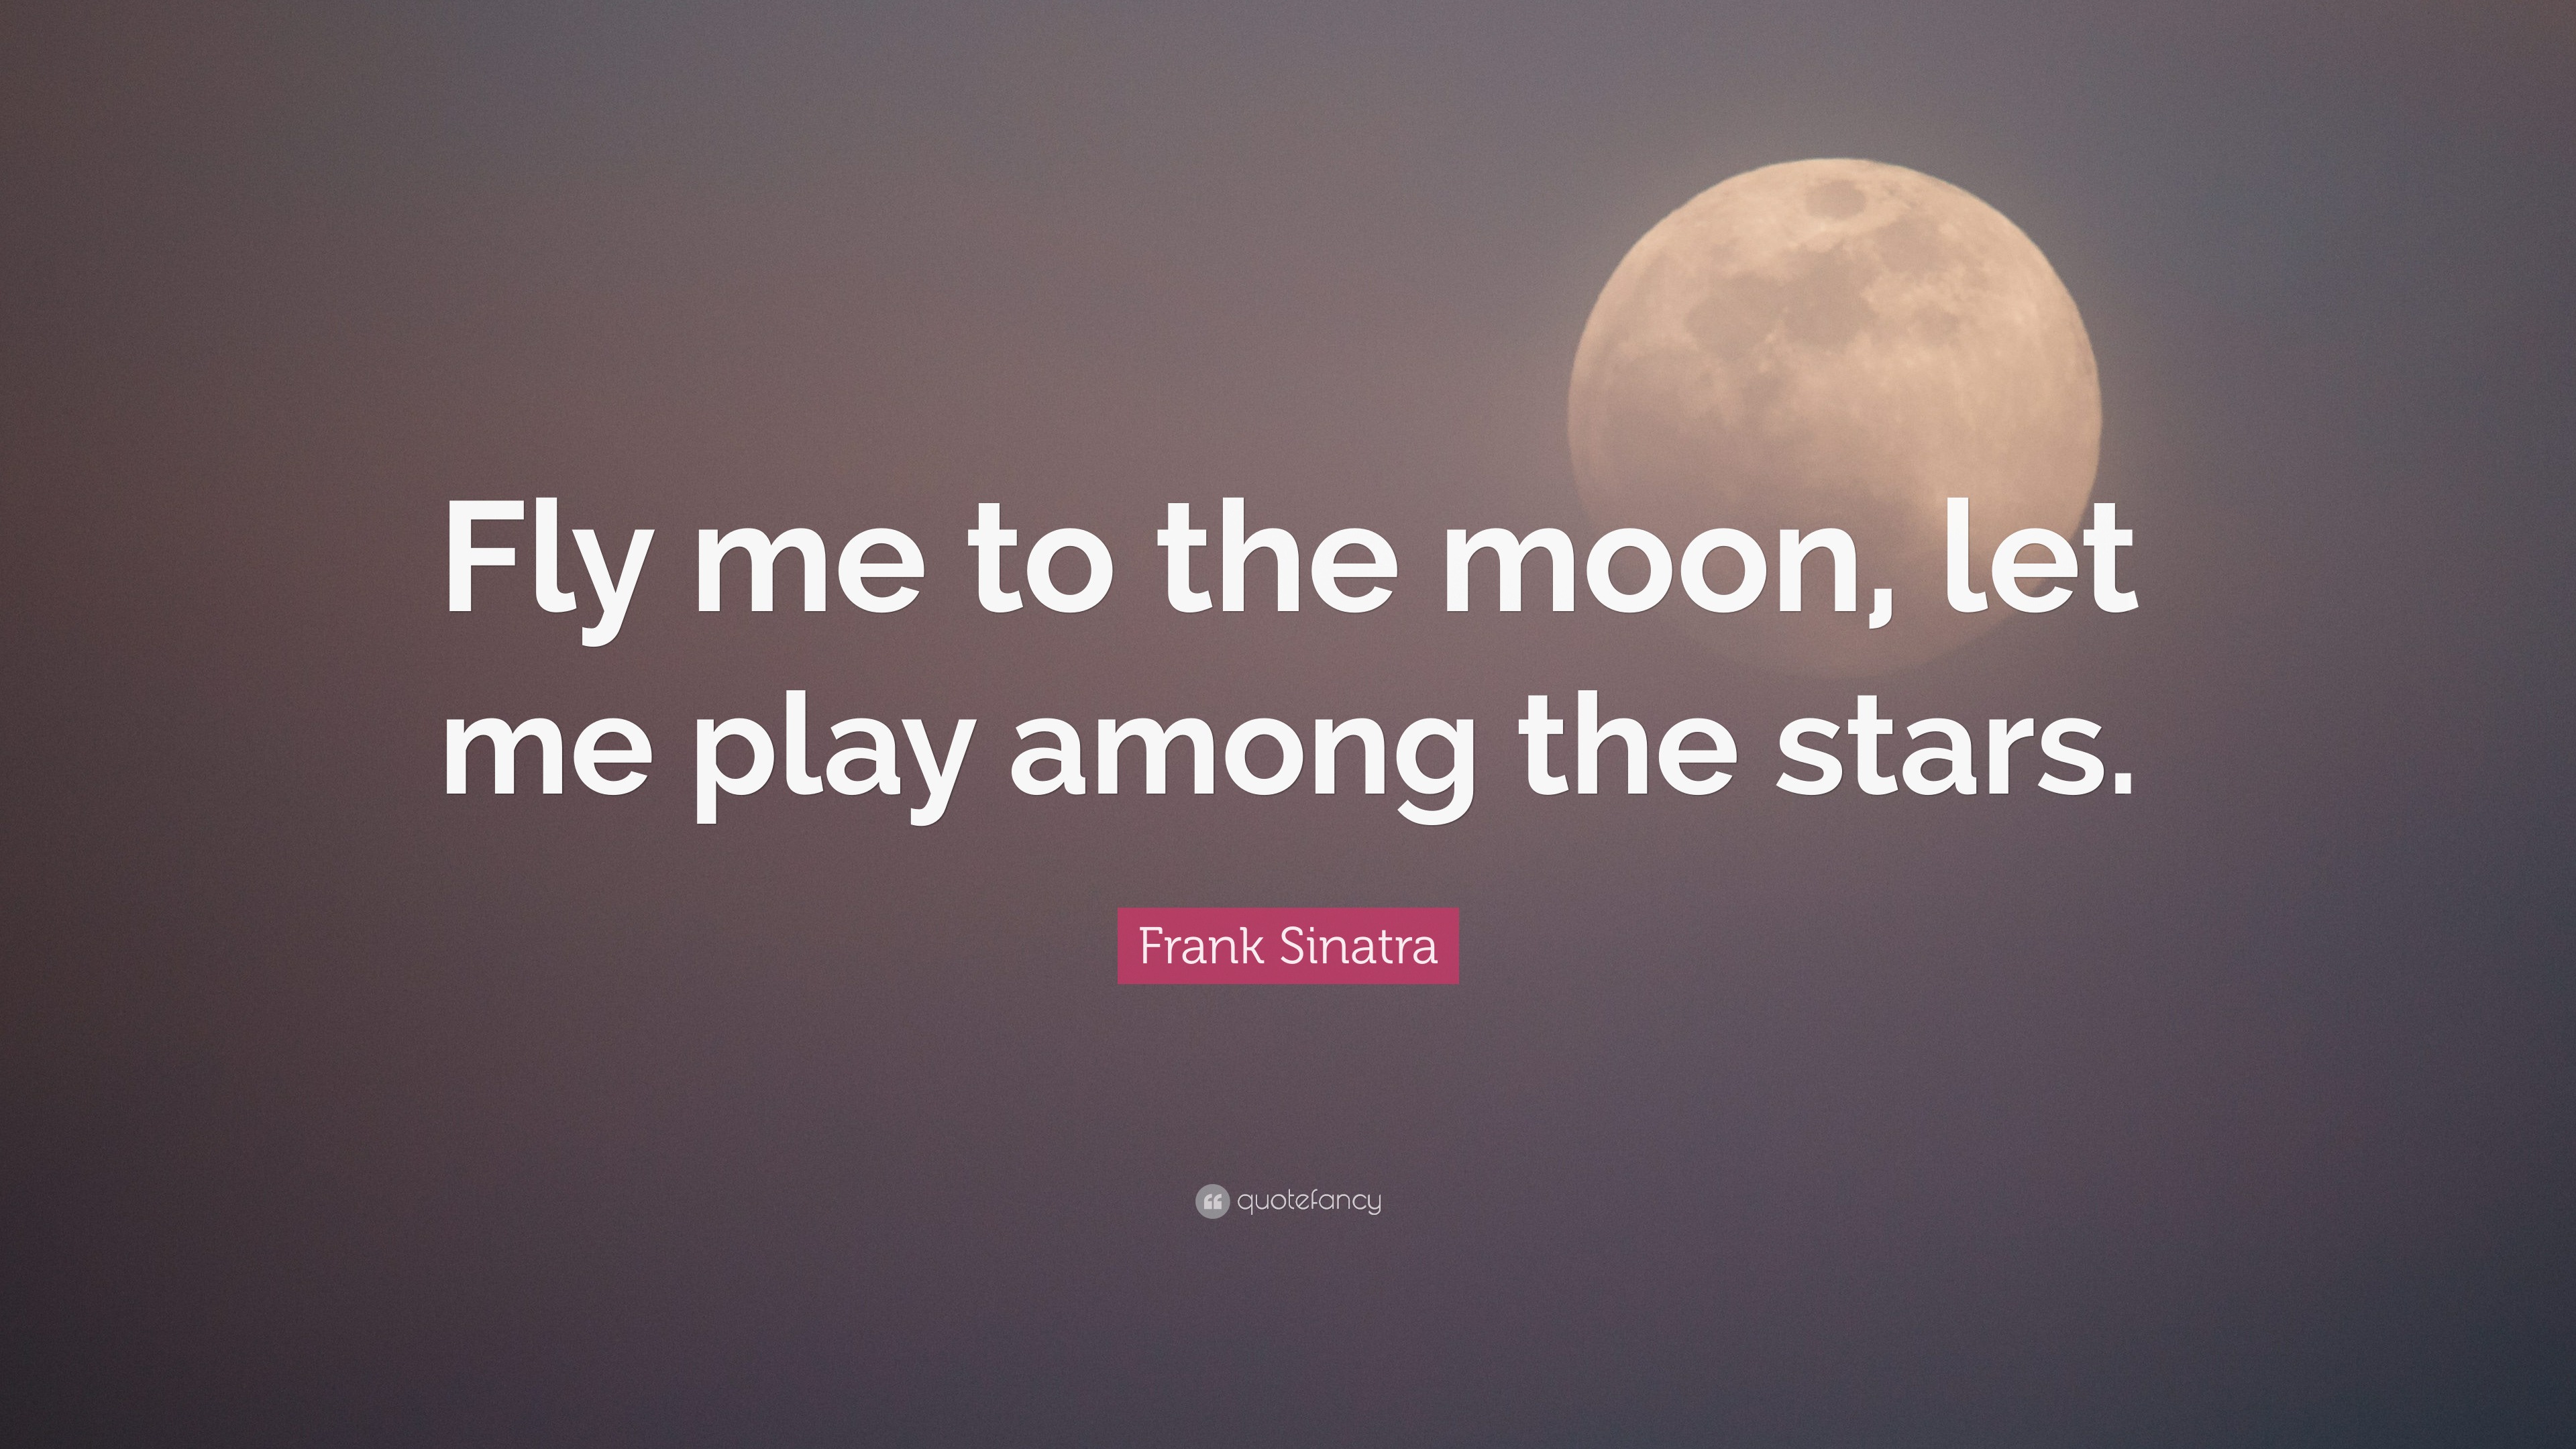 6361563-Frank-Sinatra-Quote-Fly-me-to-the-moon-let-me-play-among-the-stars.jpg